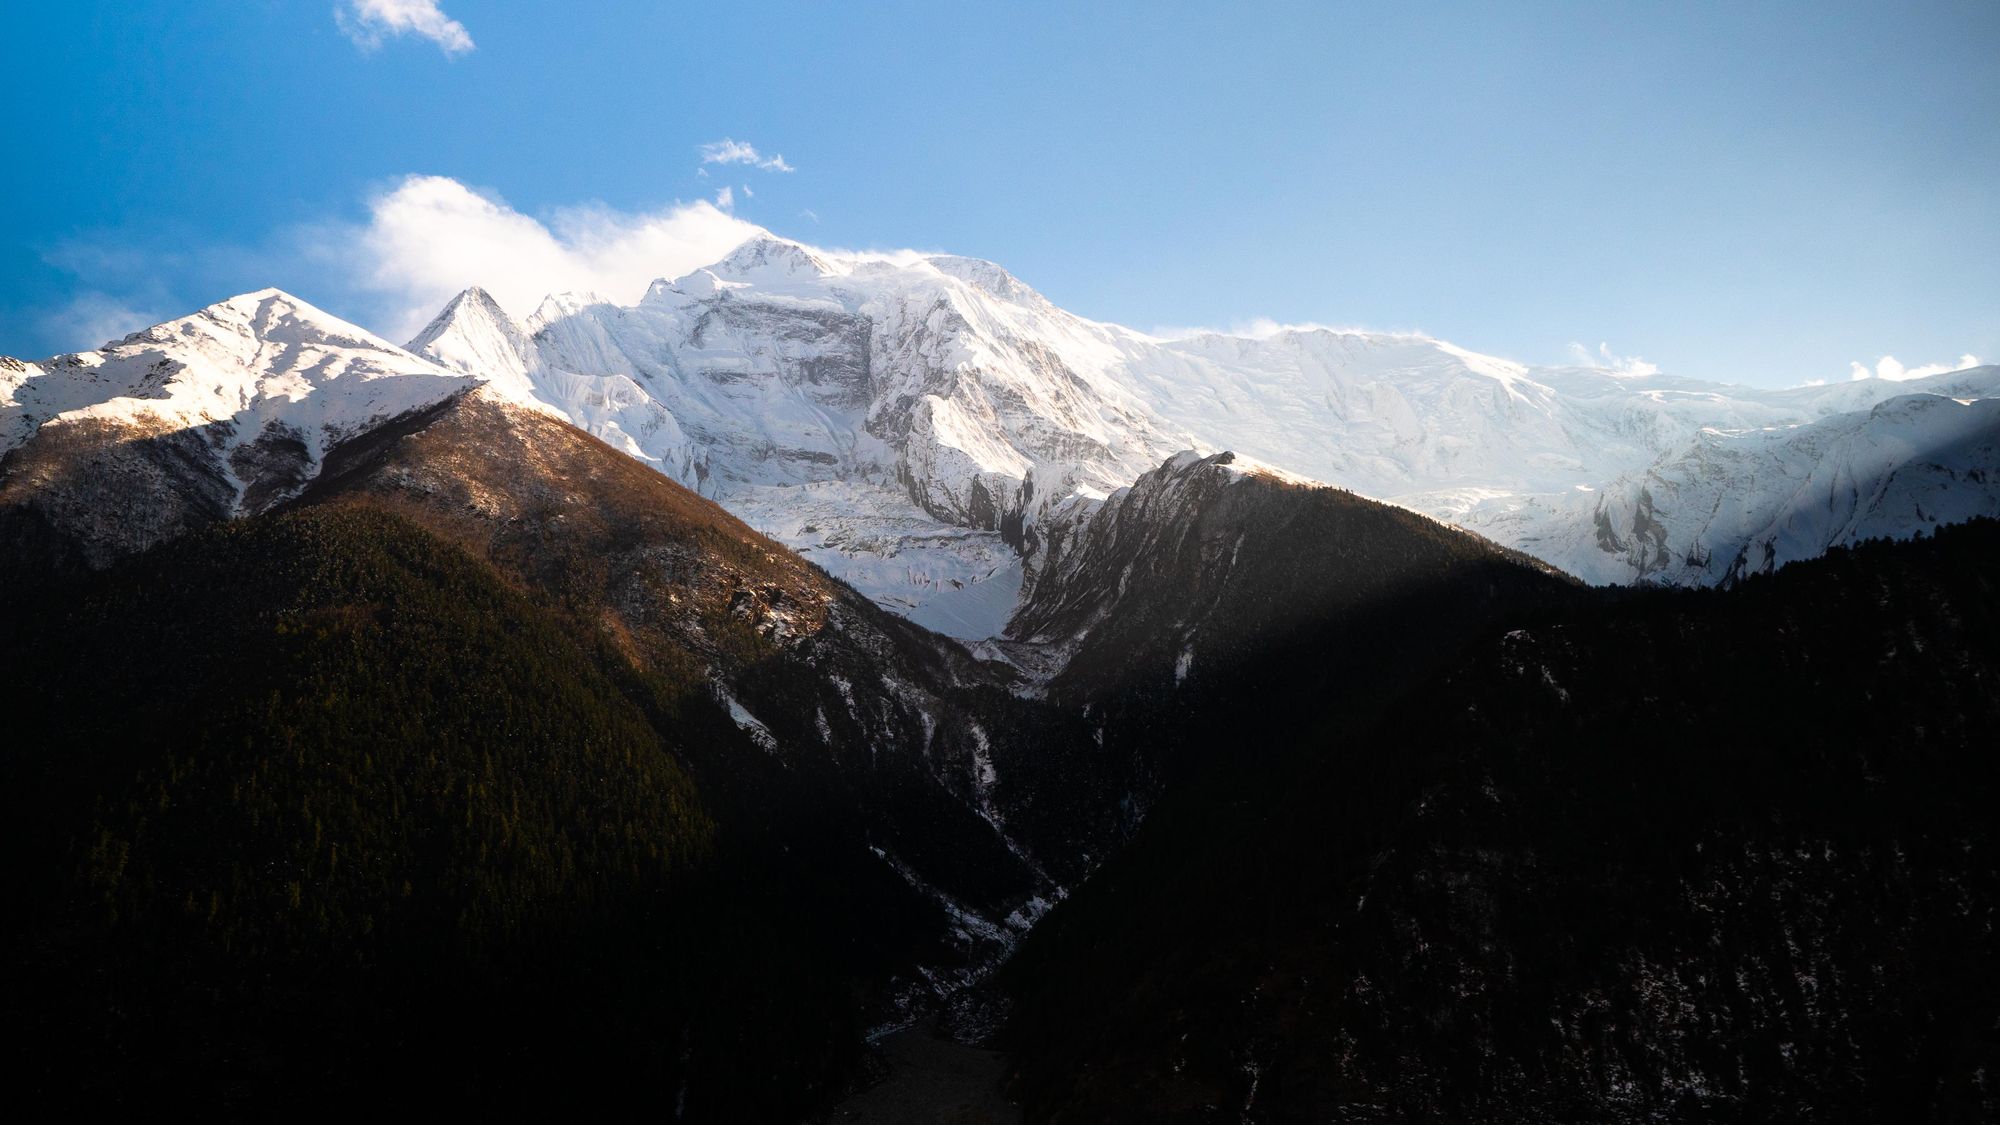 The Annapurna massif, which bumps and rises to over 8,000m high. Photo: Josh Edwards